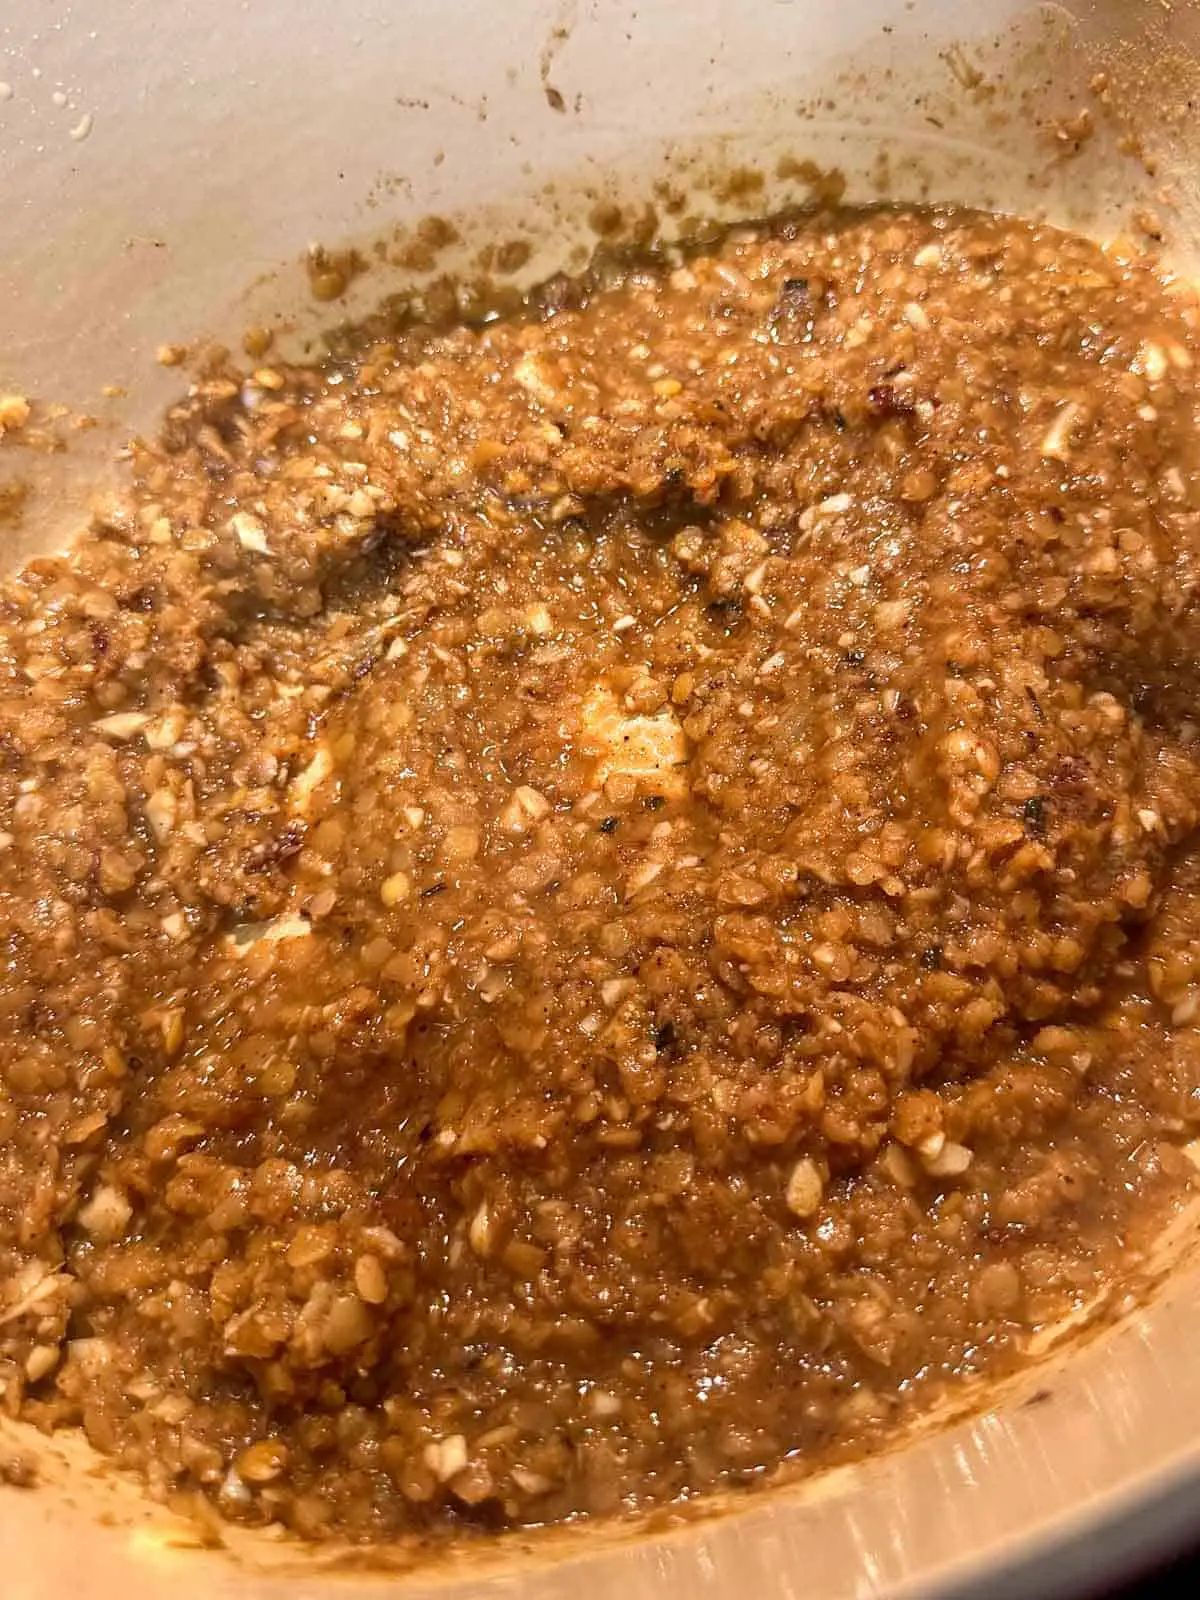 Red split lentils cooked with minced garlic, chopped onions, and Berbere spice.